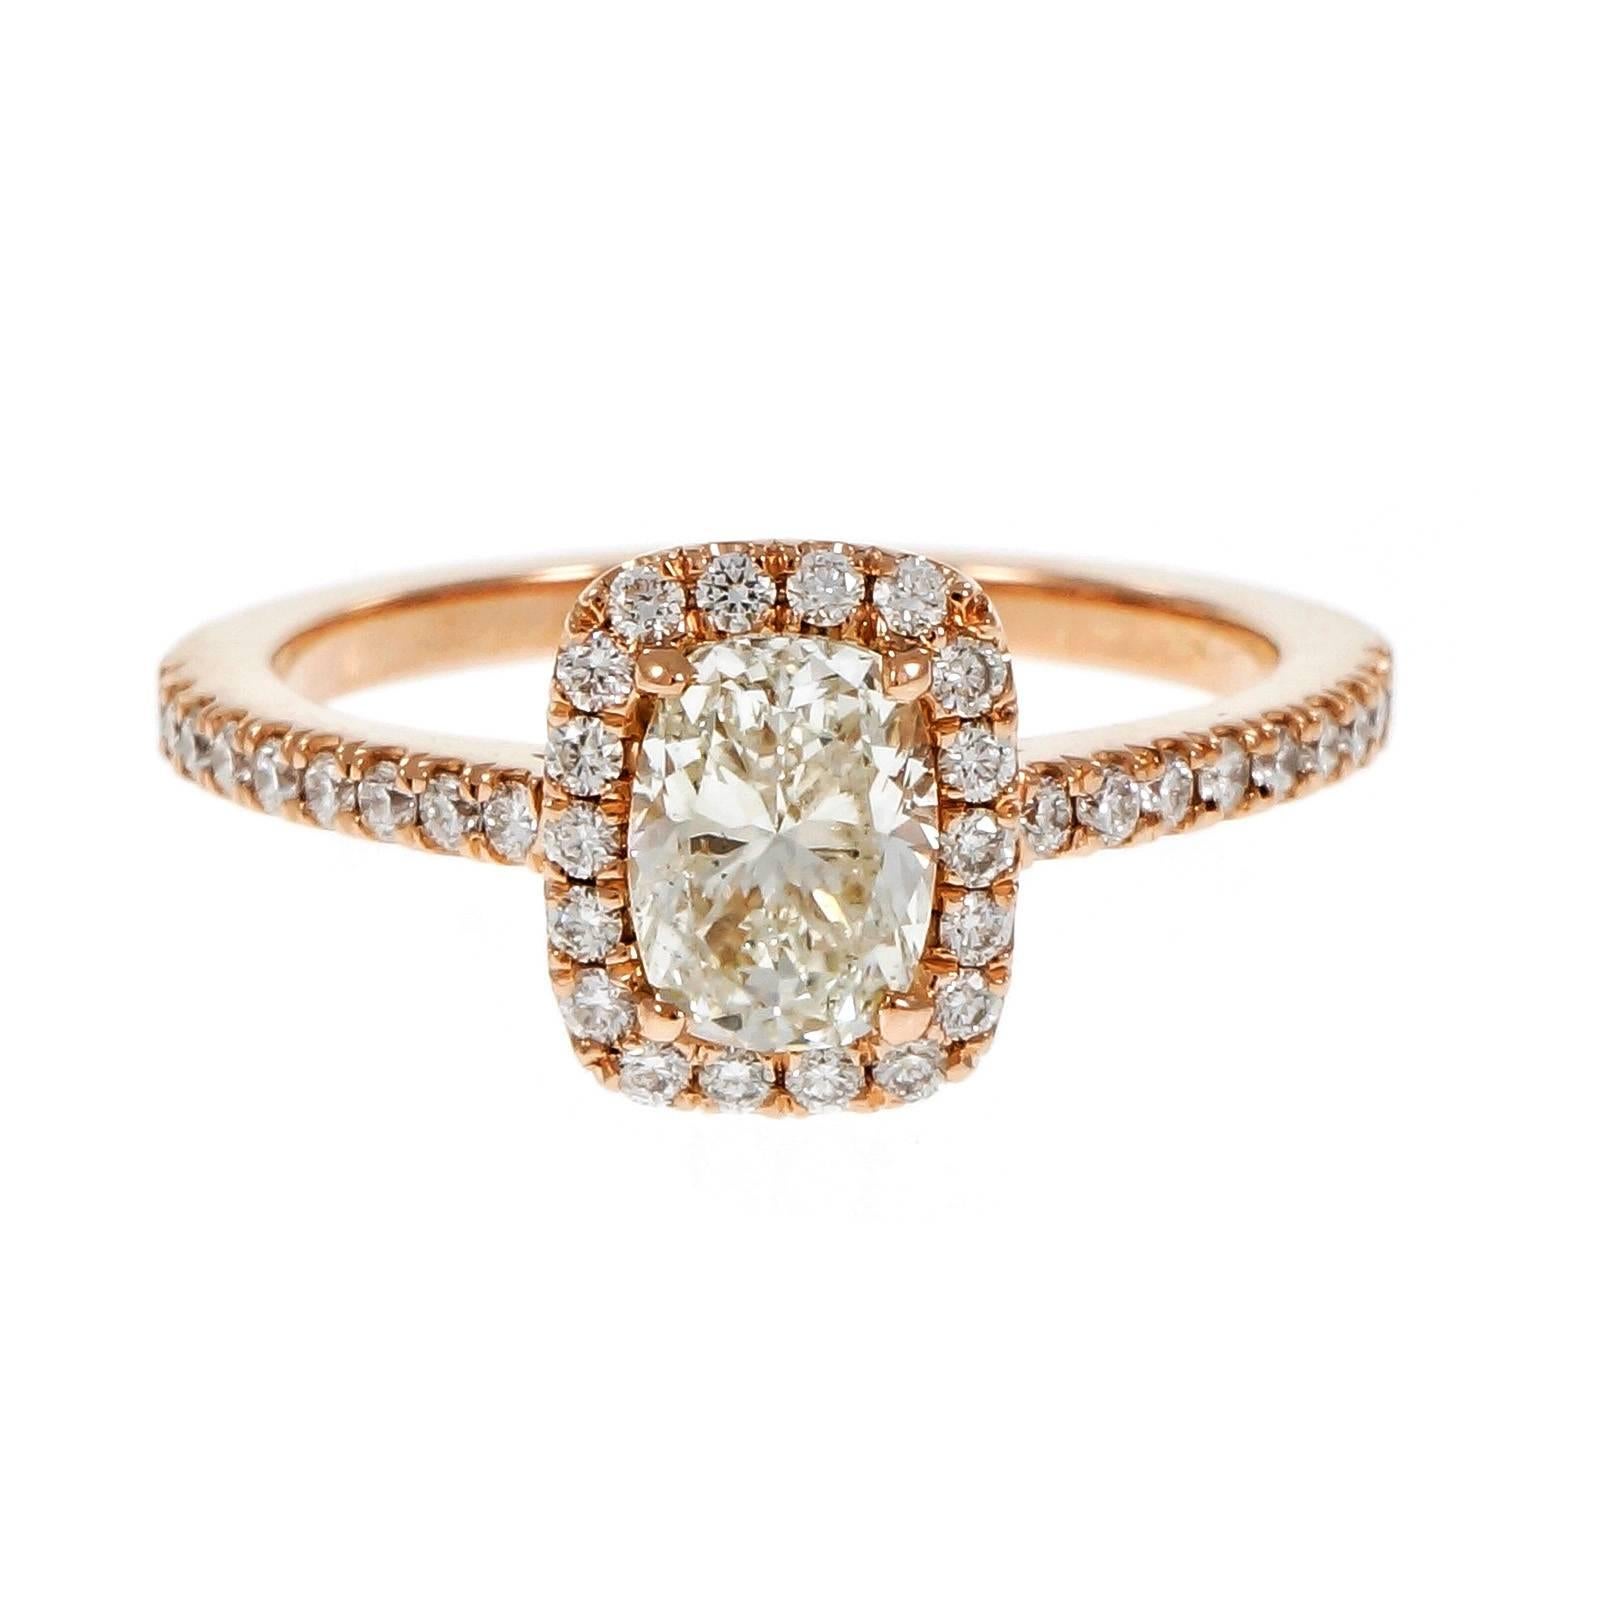 From the Peter Suchy Workshop, original cushion cut GIA certified diamond in a 14 rose gold setting with a halo of round full cut diamonds. 

1 cushion diamond, approx. total weight .90cts, L, I1, GIA certificate #1172282057
36 round full cut